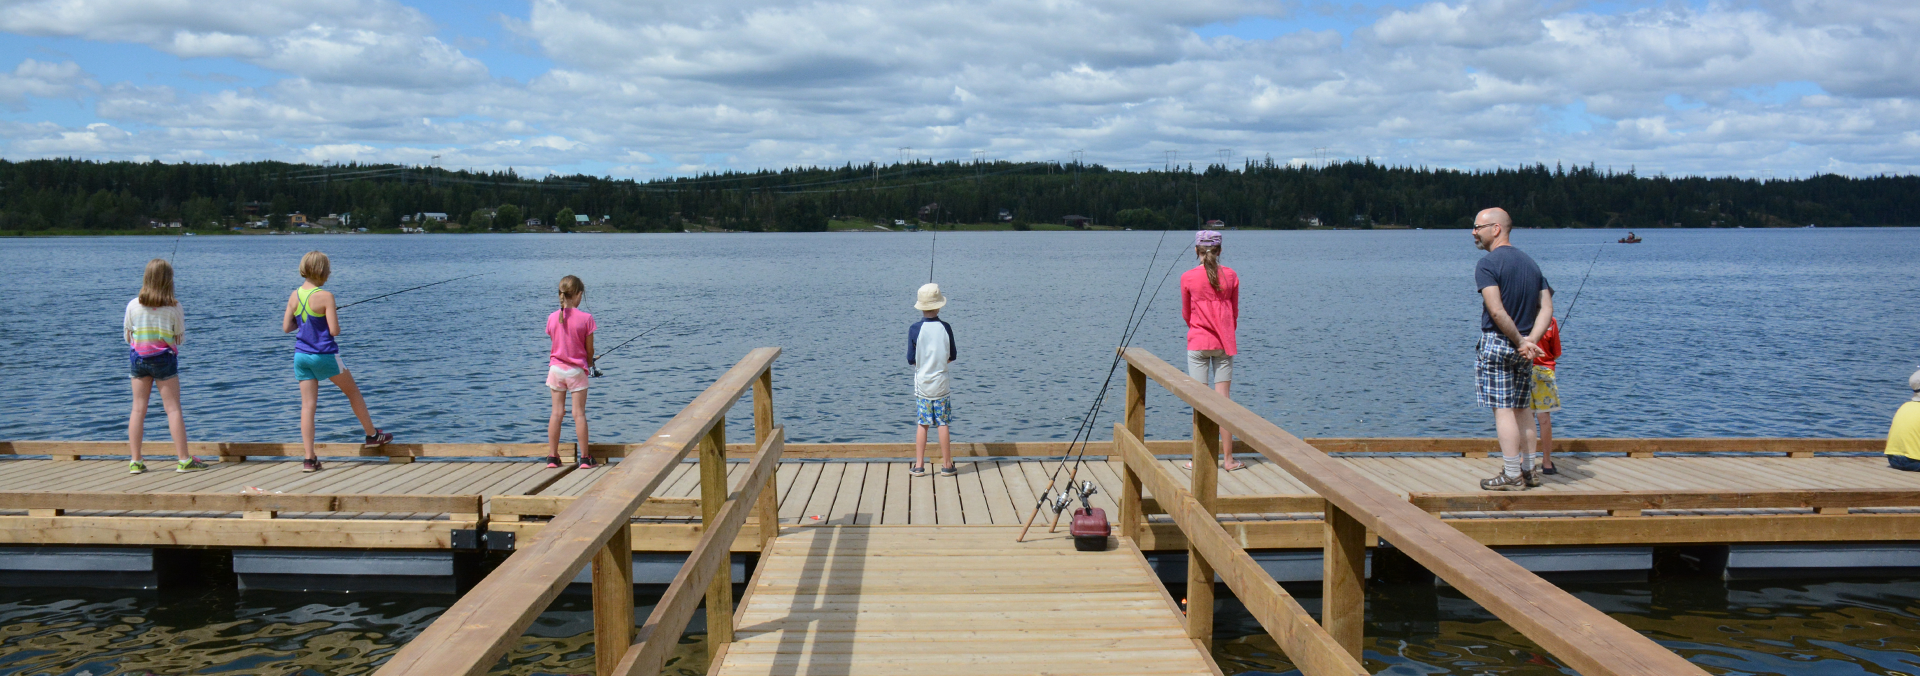 Tips for Shore and Dock Fishing Success - Freshwater Fisheries